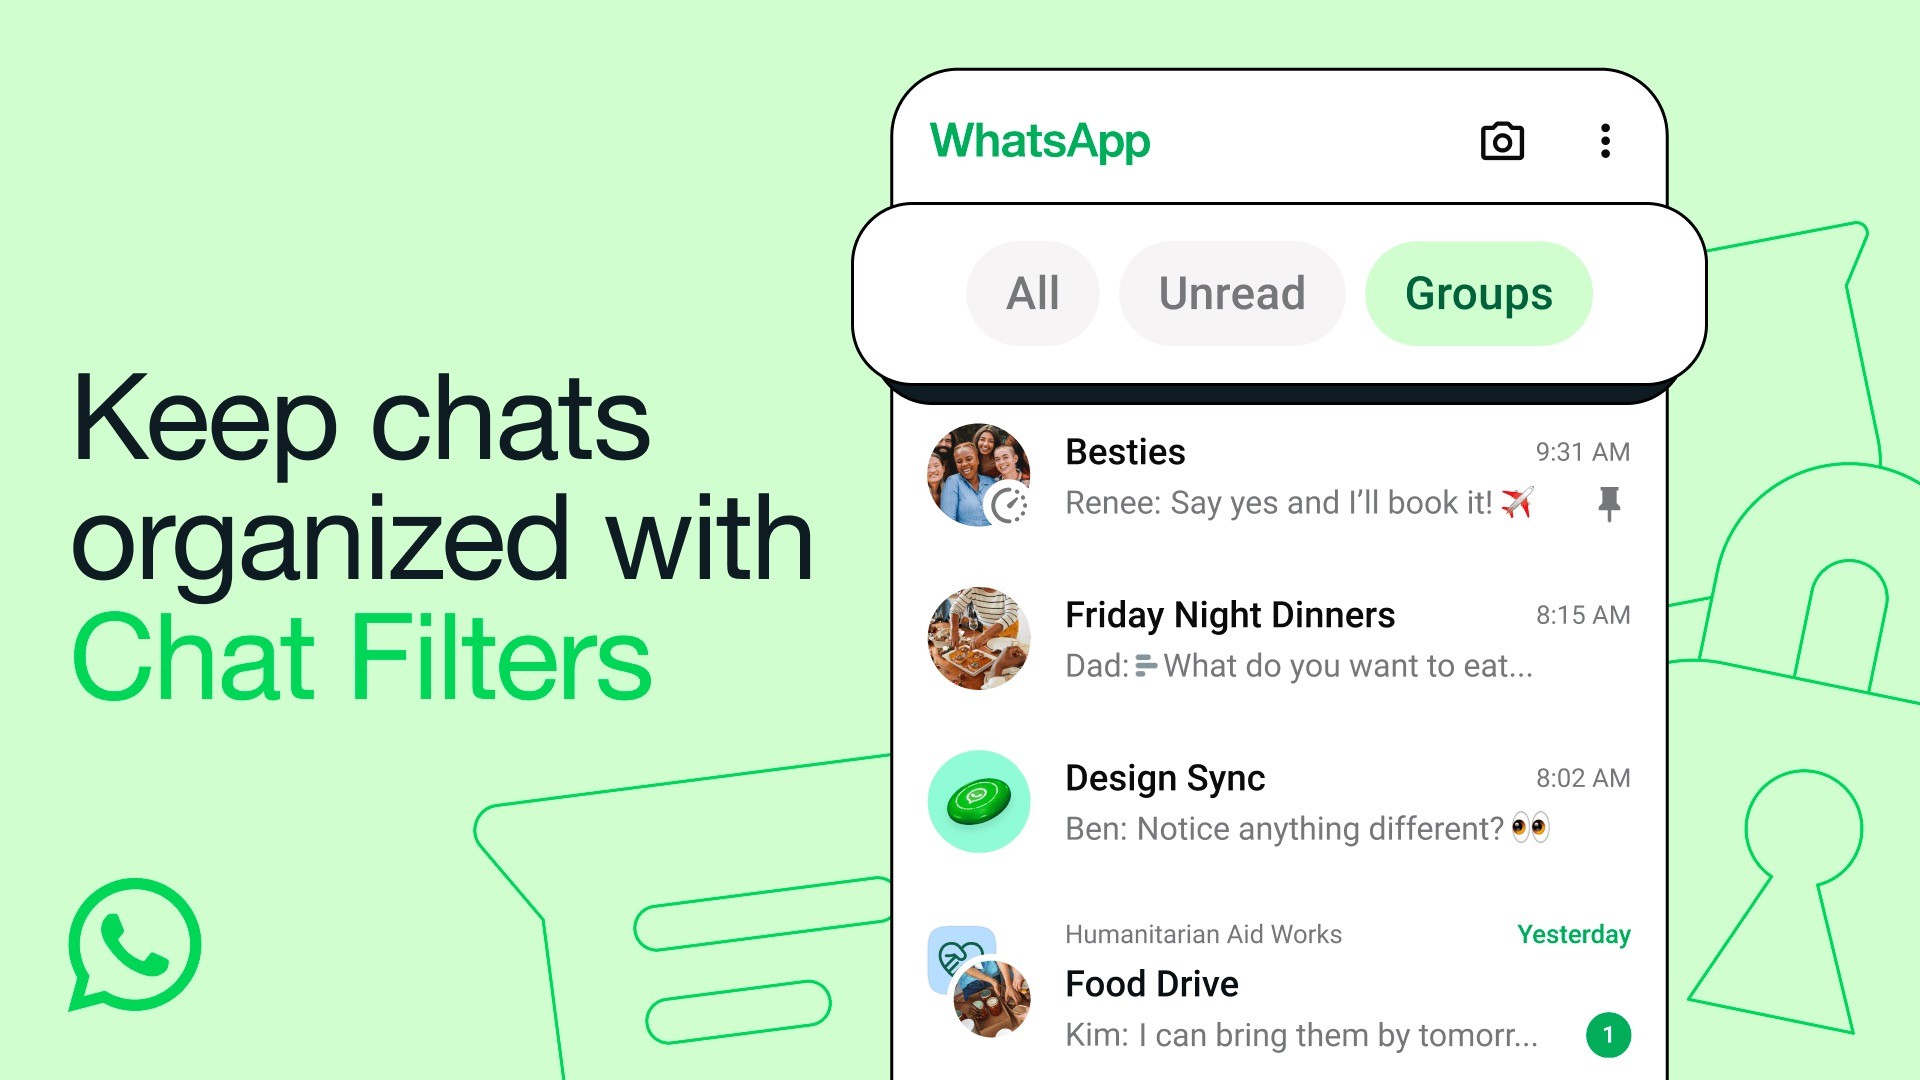 WhatsApp Rolls Out Chat Filters to Help Find Conversations Faster